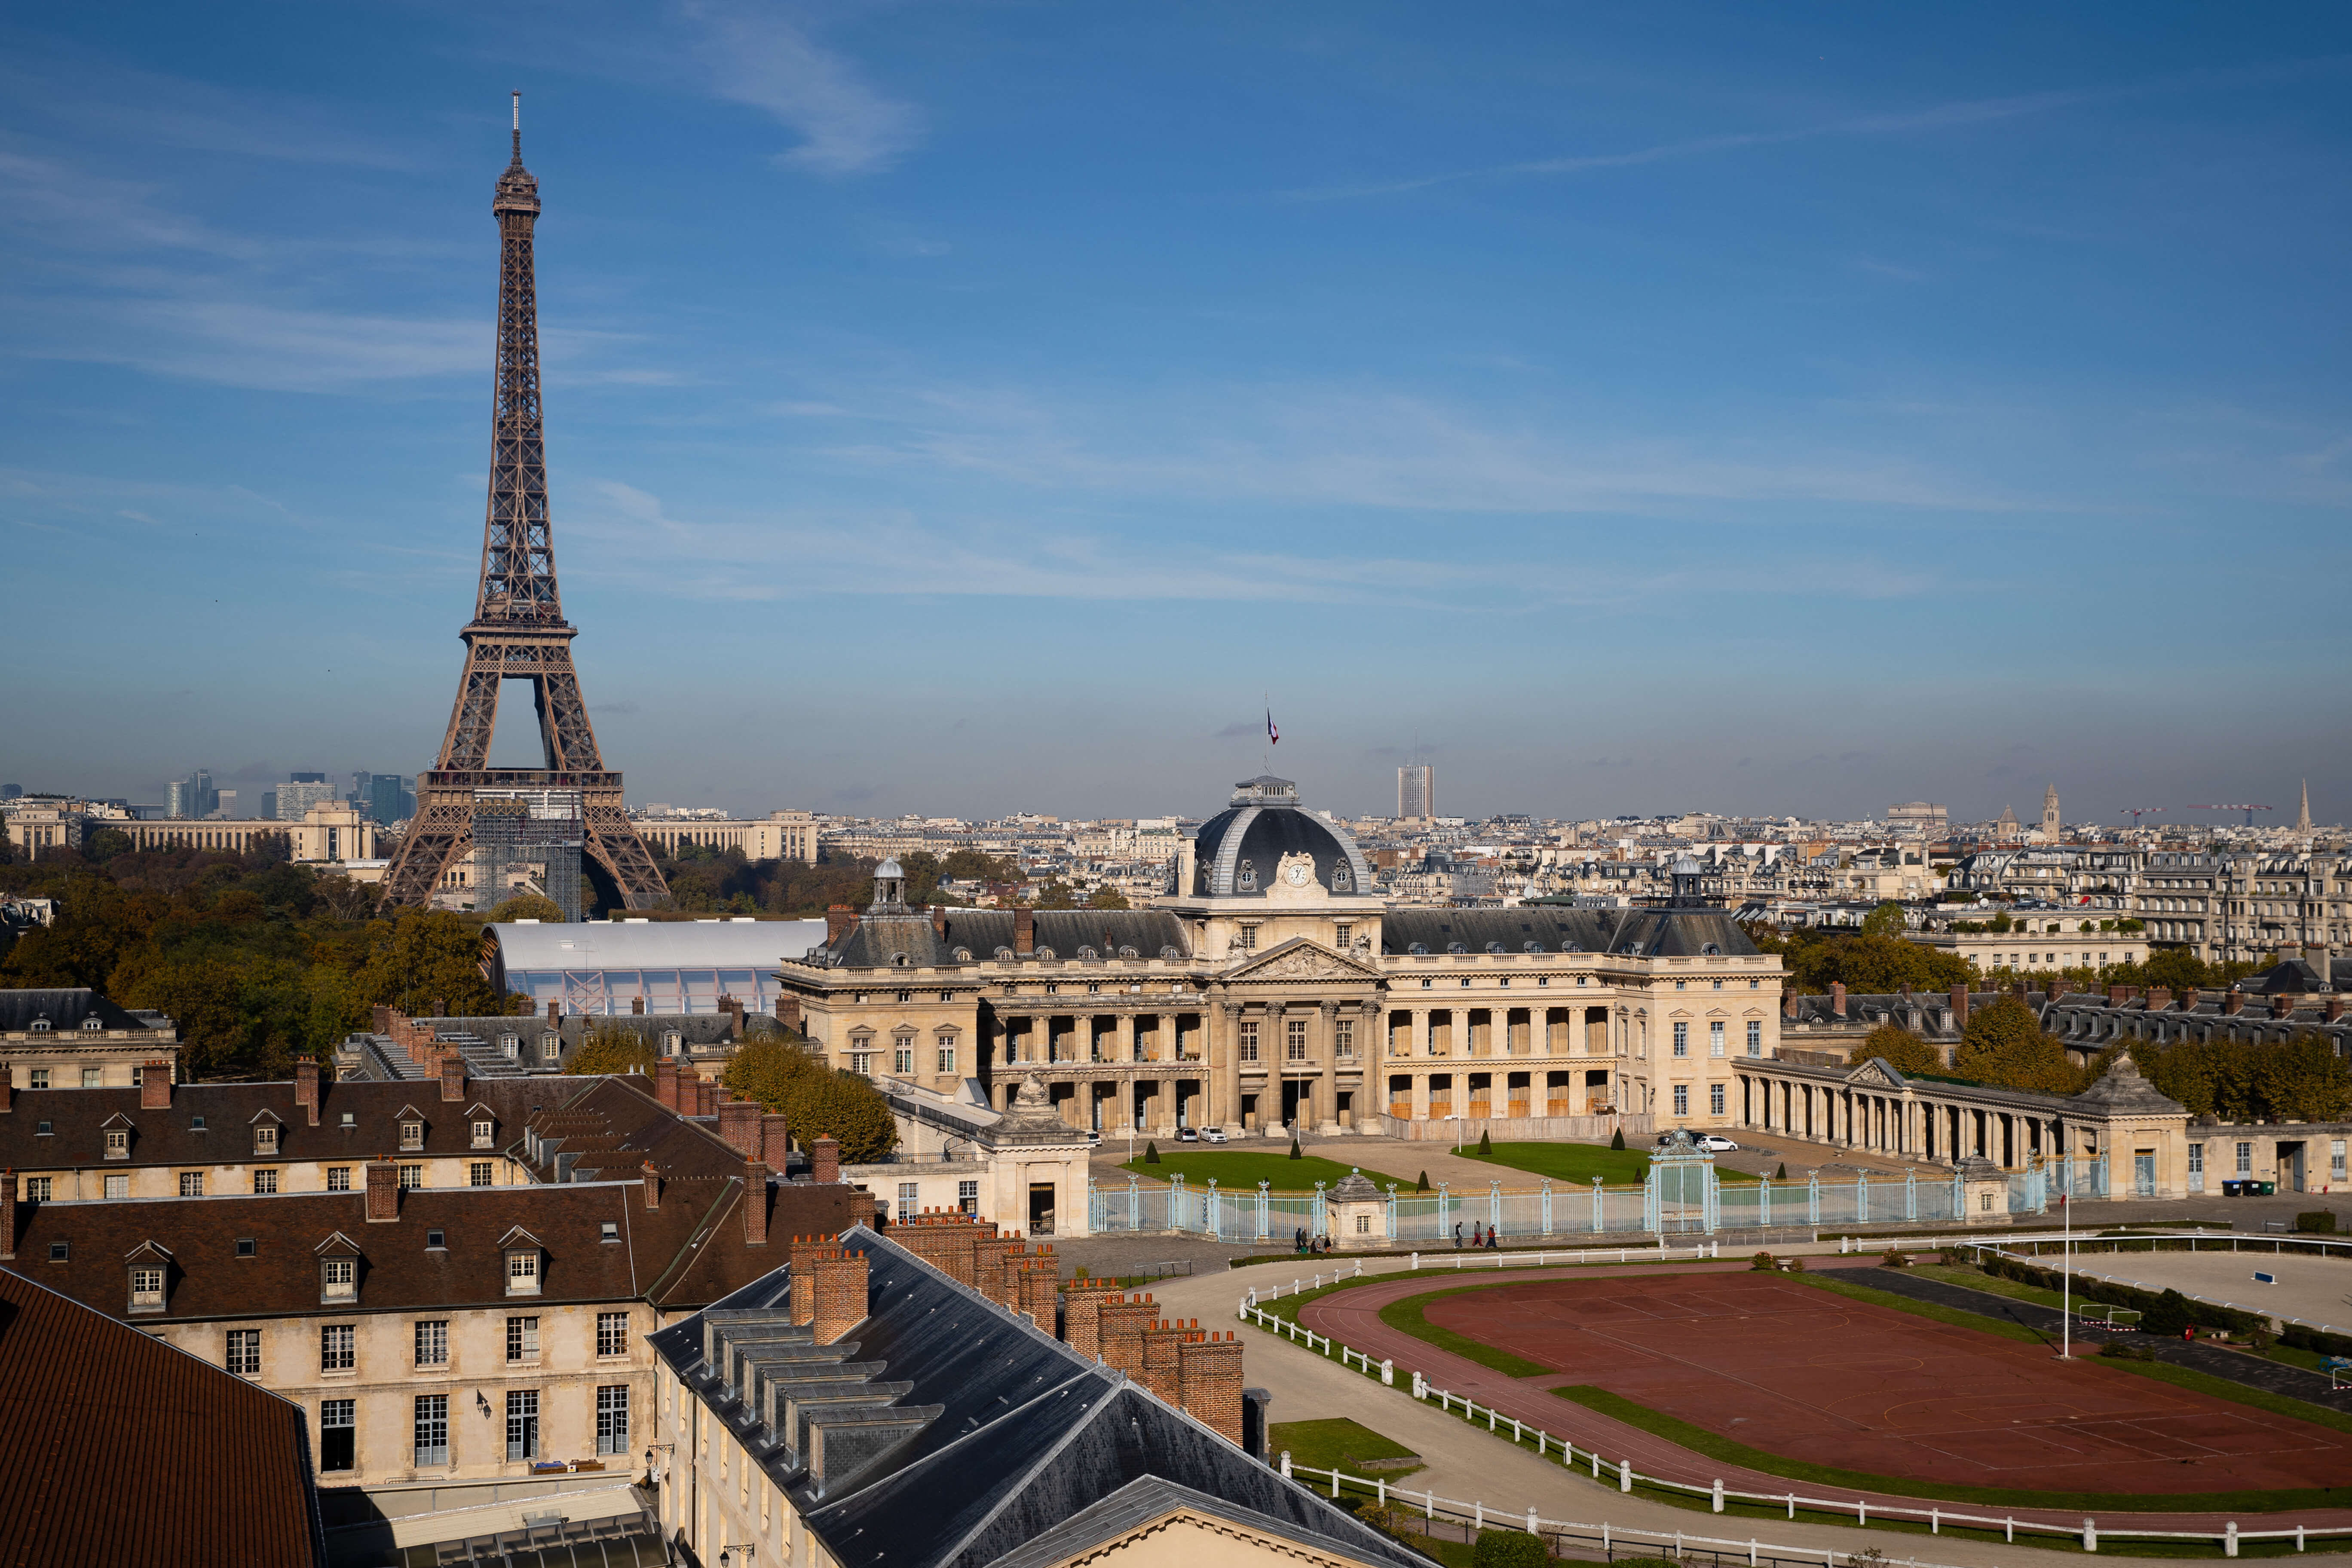 The PhilFrance Scholarship is open for Filipino students to study in France